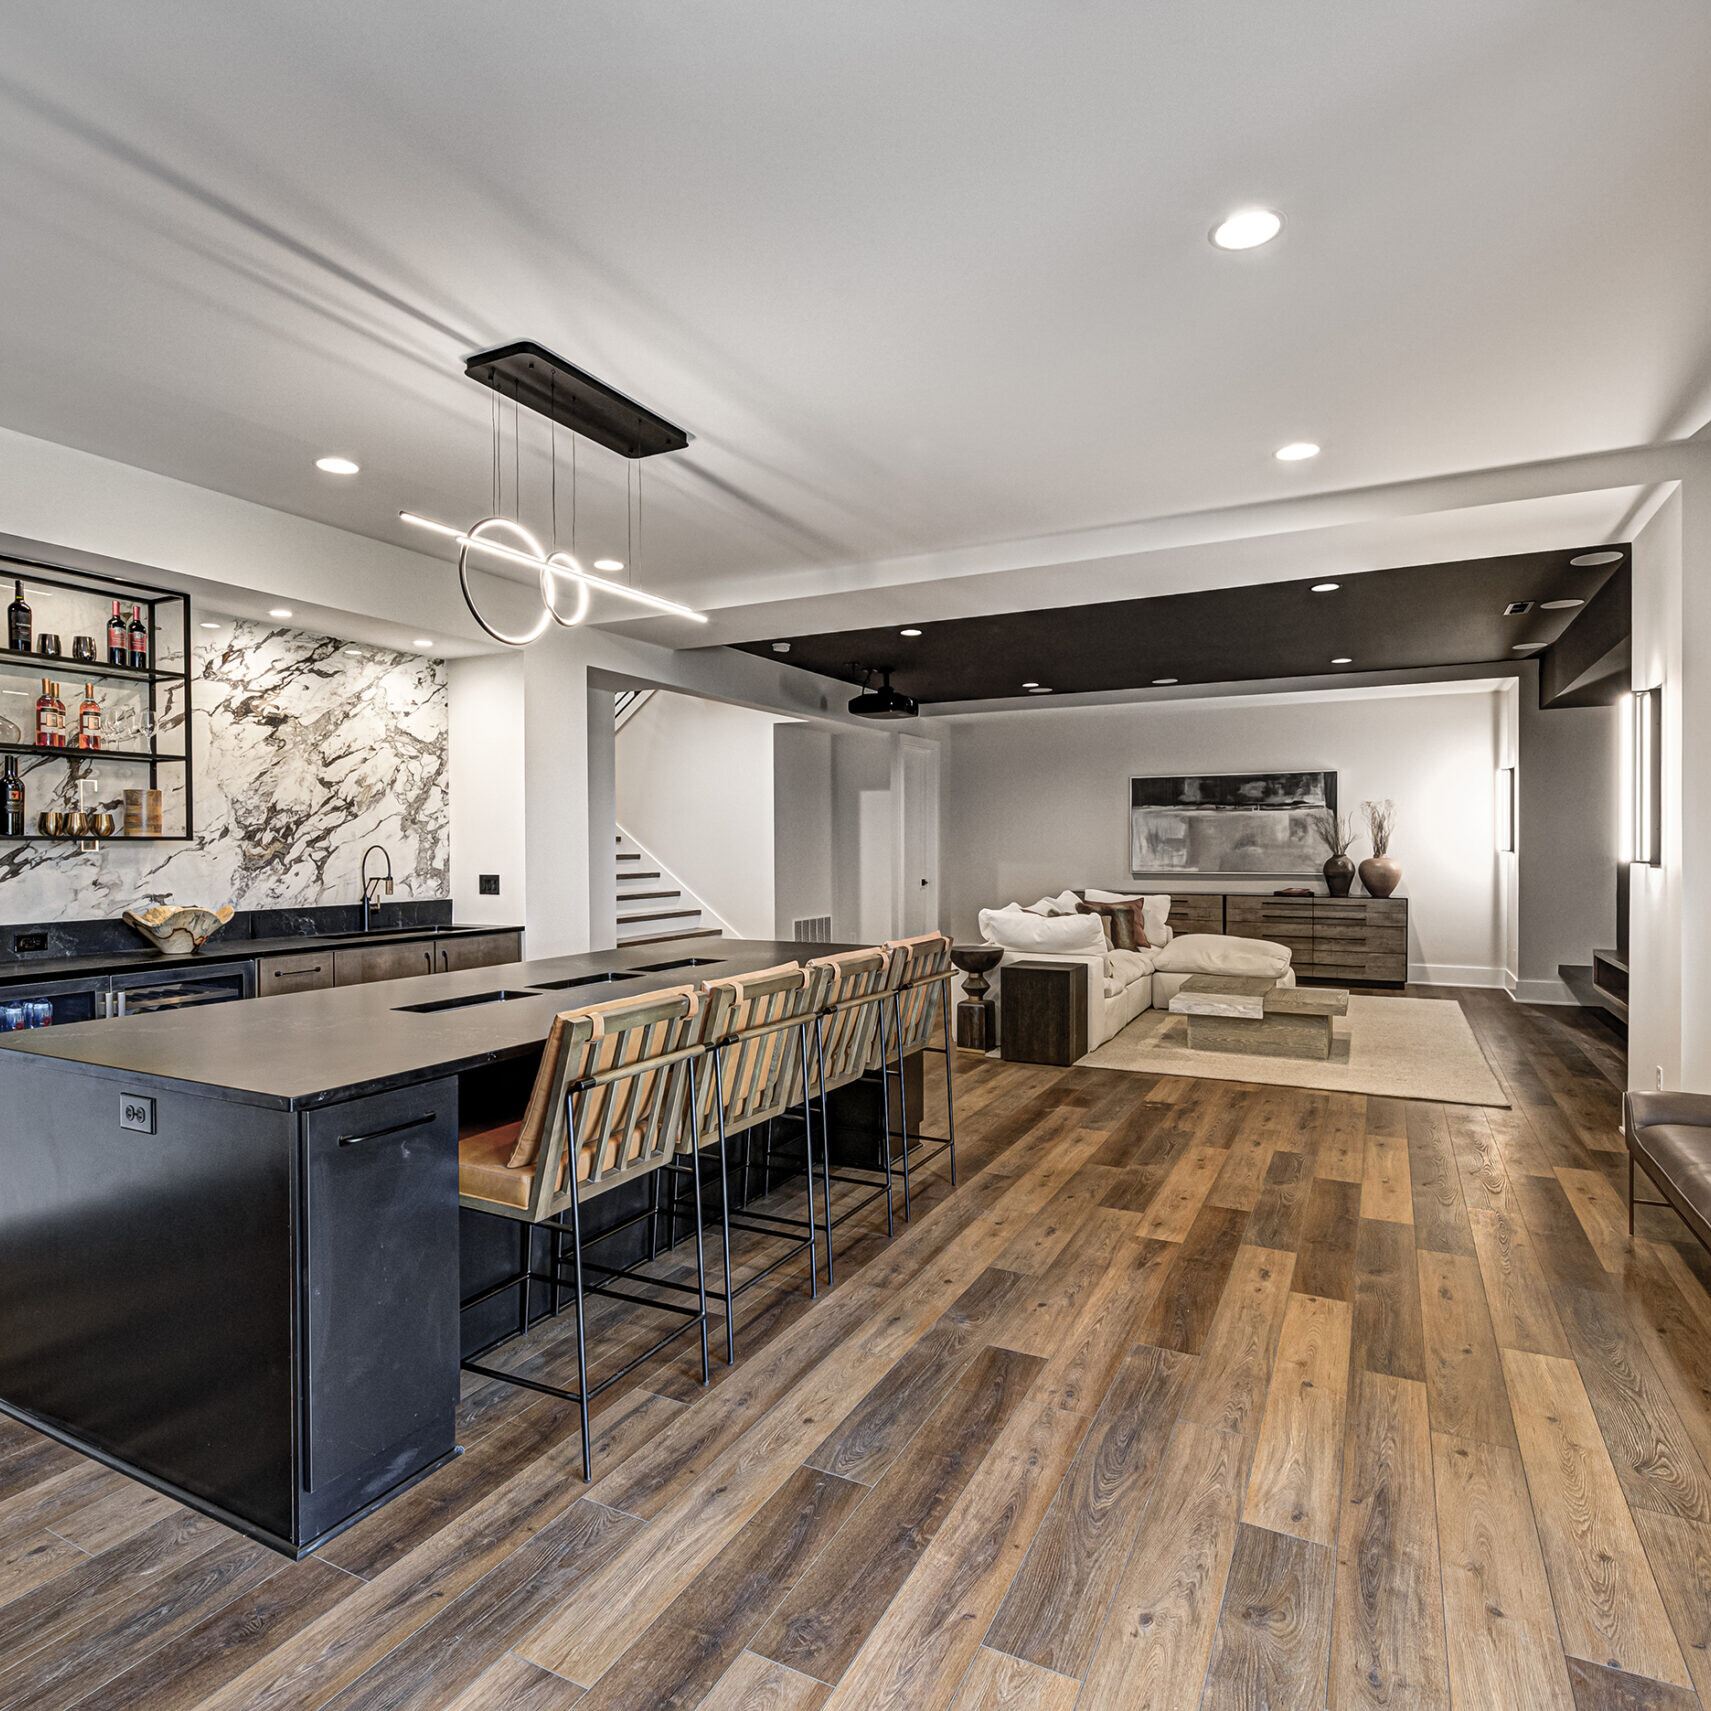 A modern kitchen with wood floors and a bar area.